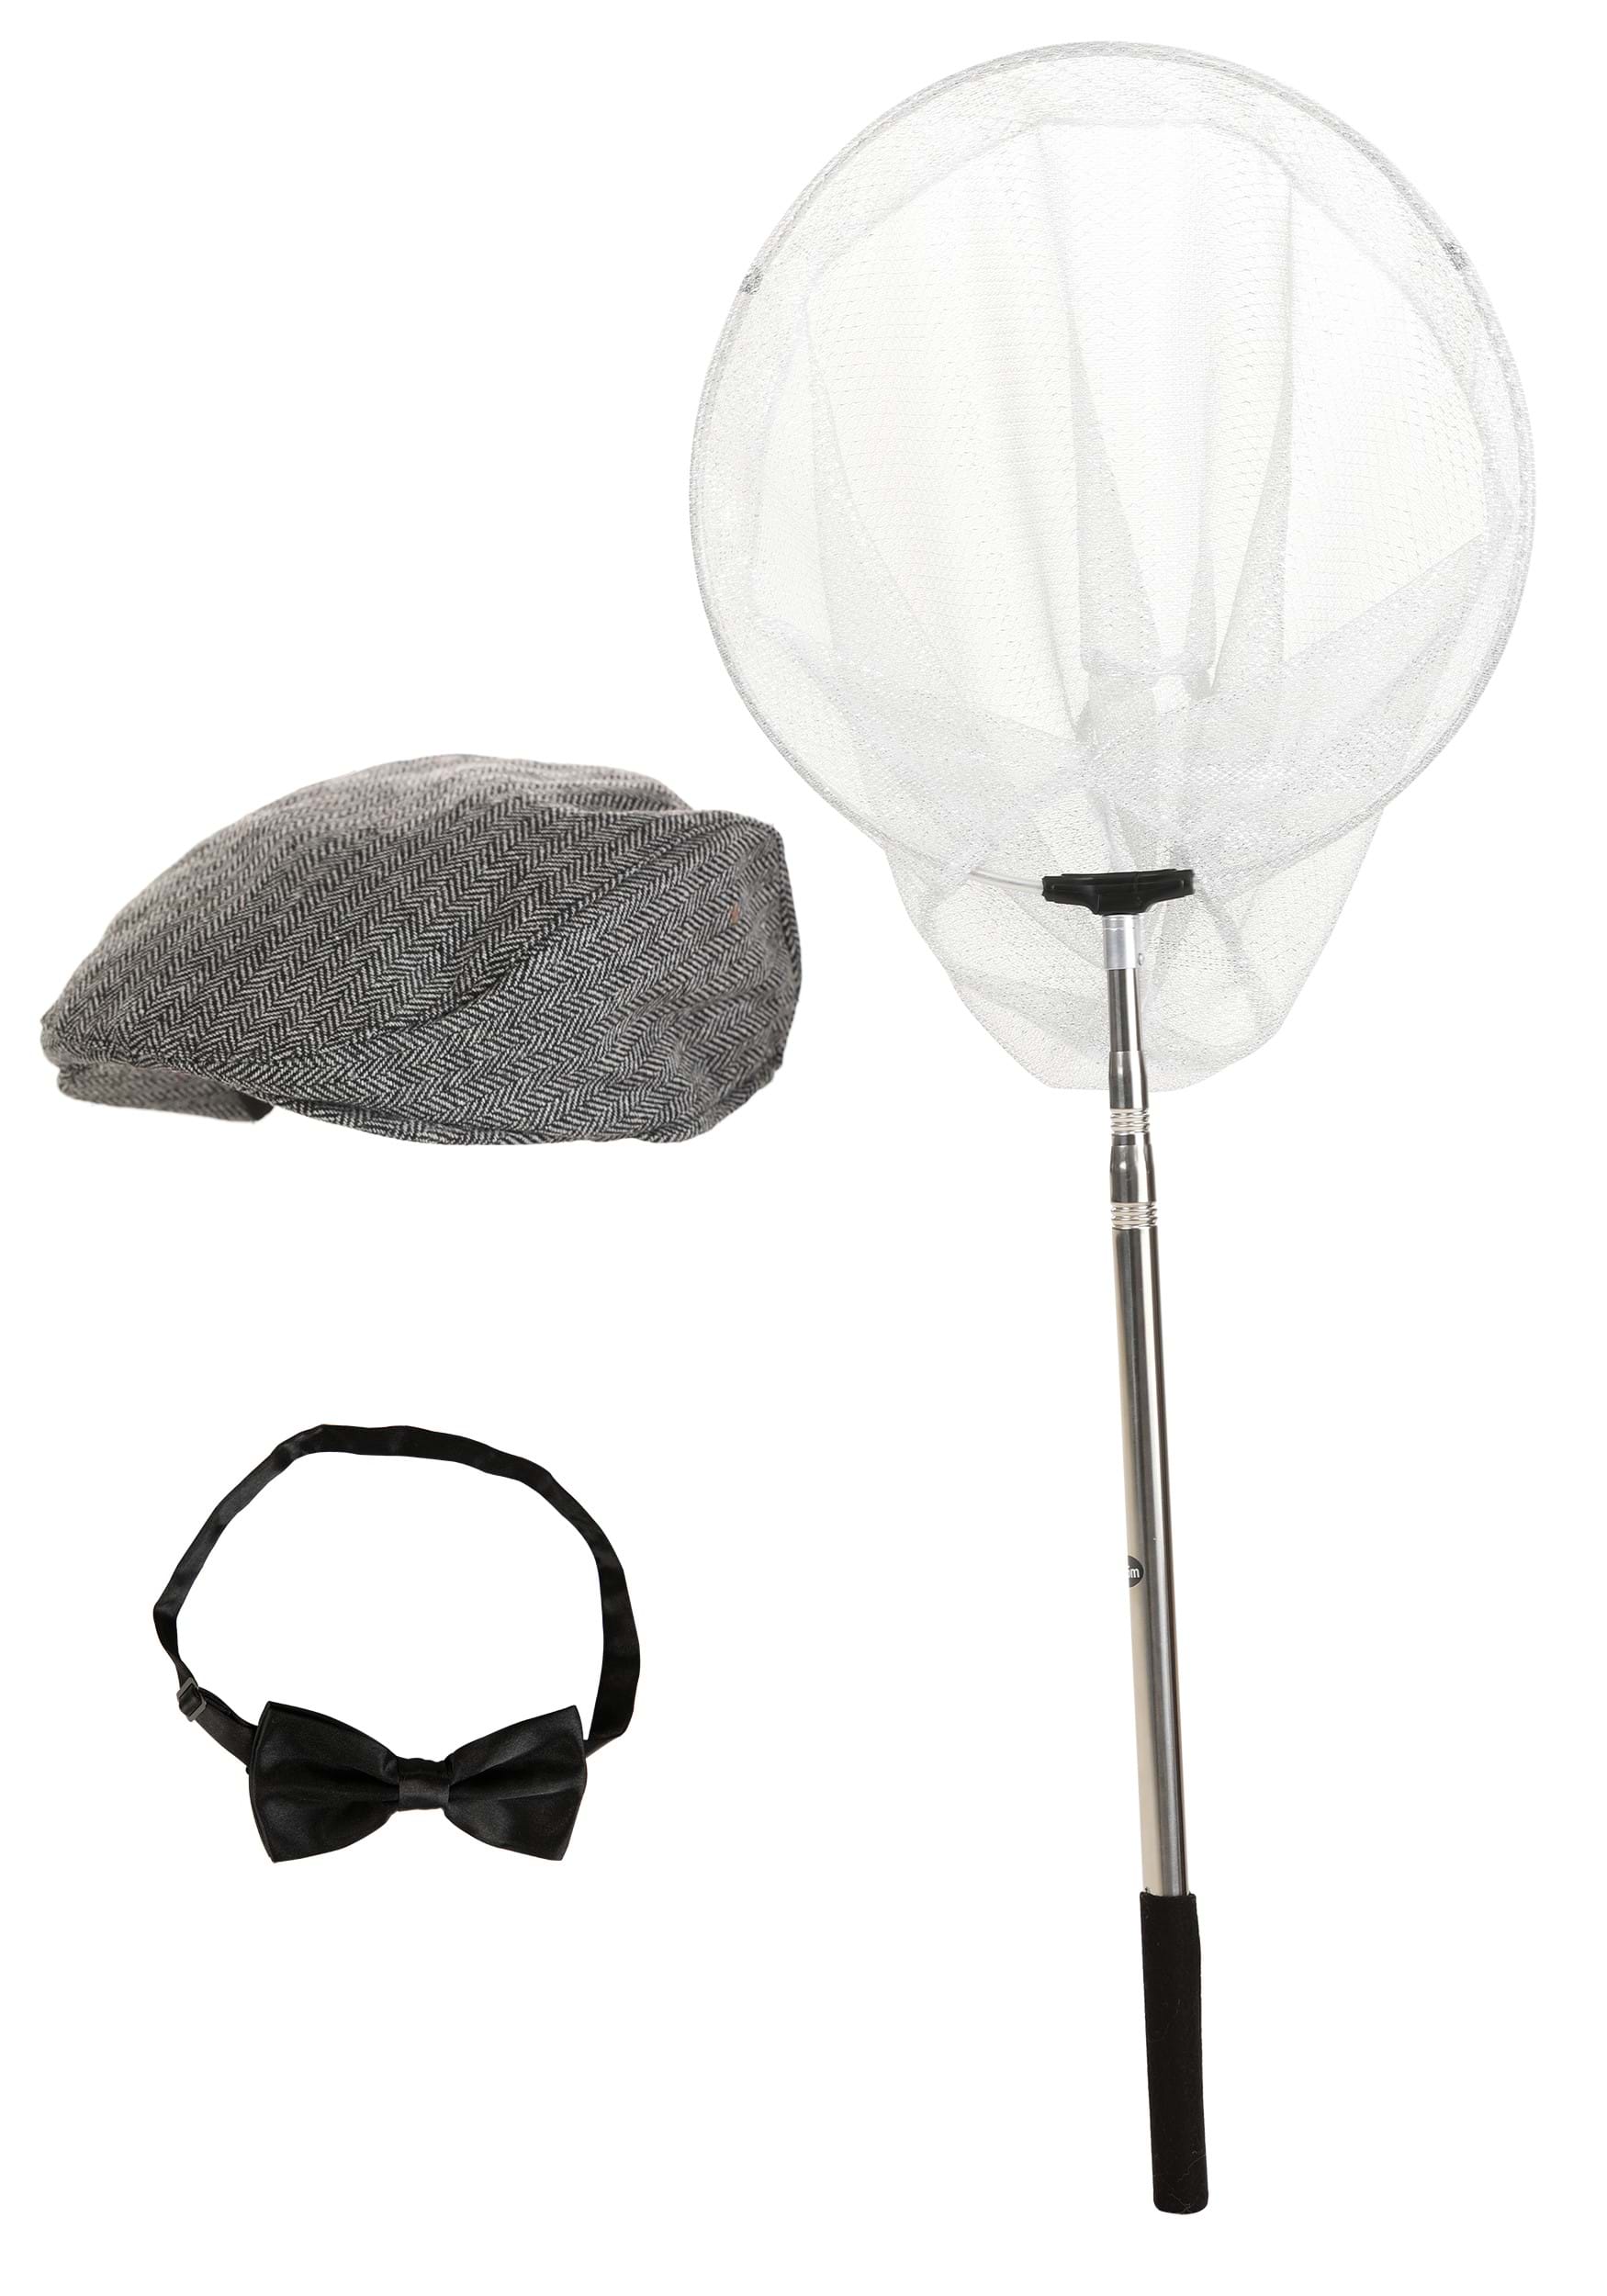 elope Dog Catcher Costume Kit for Kids and Adults